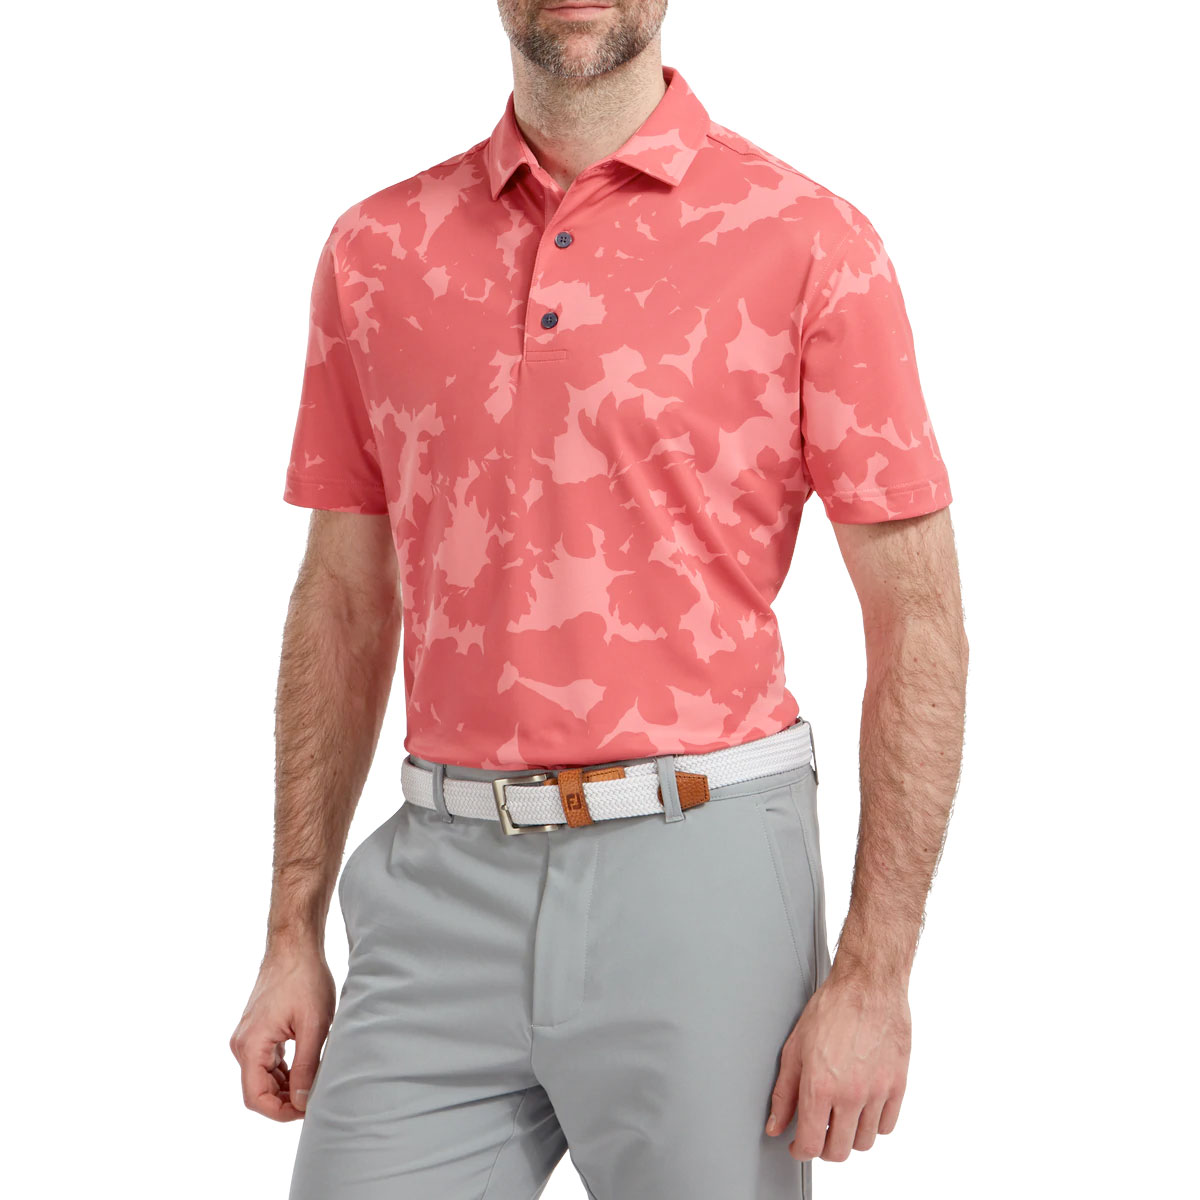 Camo Golf Shirt Red And White Camouflage Golf All Over Print - Anynee